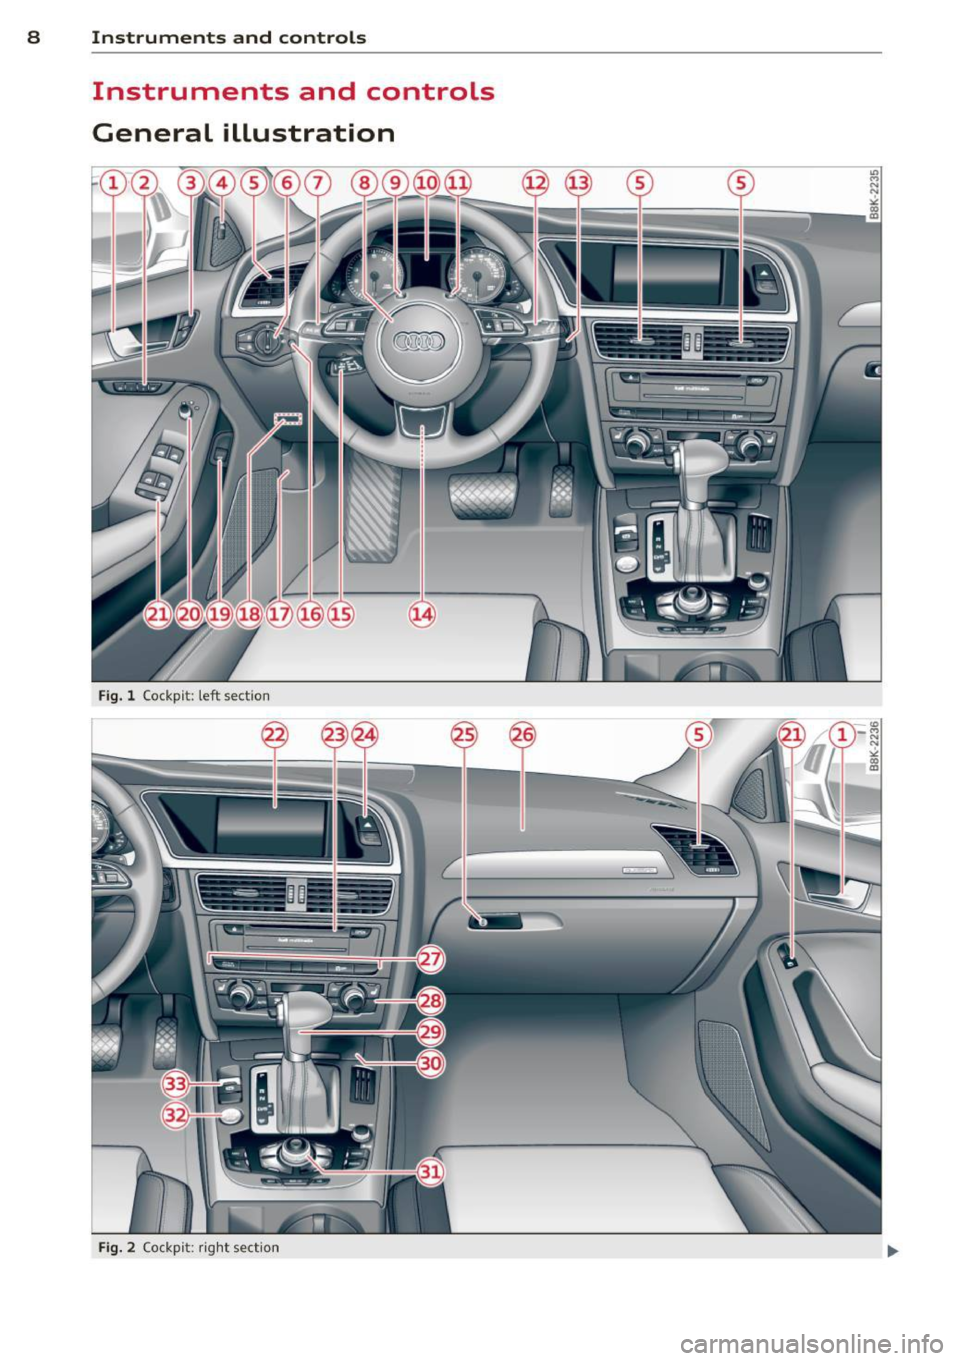 AUDI S4 SEDAN 2013  Owners Manual 8  Instruments and controls 
Instruments  and  controls 
General  illustration 
Fig. l Cockp it:  left  sect io n 
---=- ---1 =----- -
- --
- --
Fig. 2 Cock pi t: ri ght  sect io n  